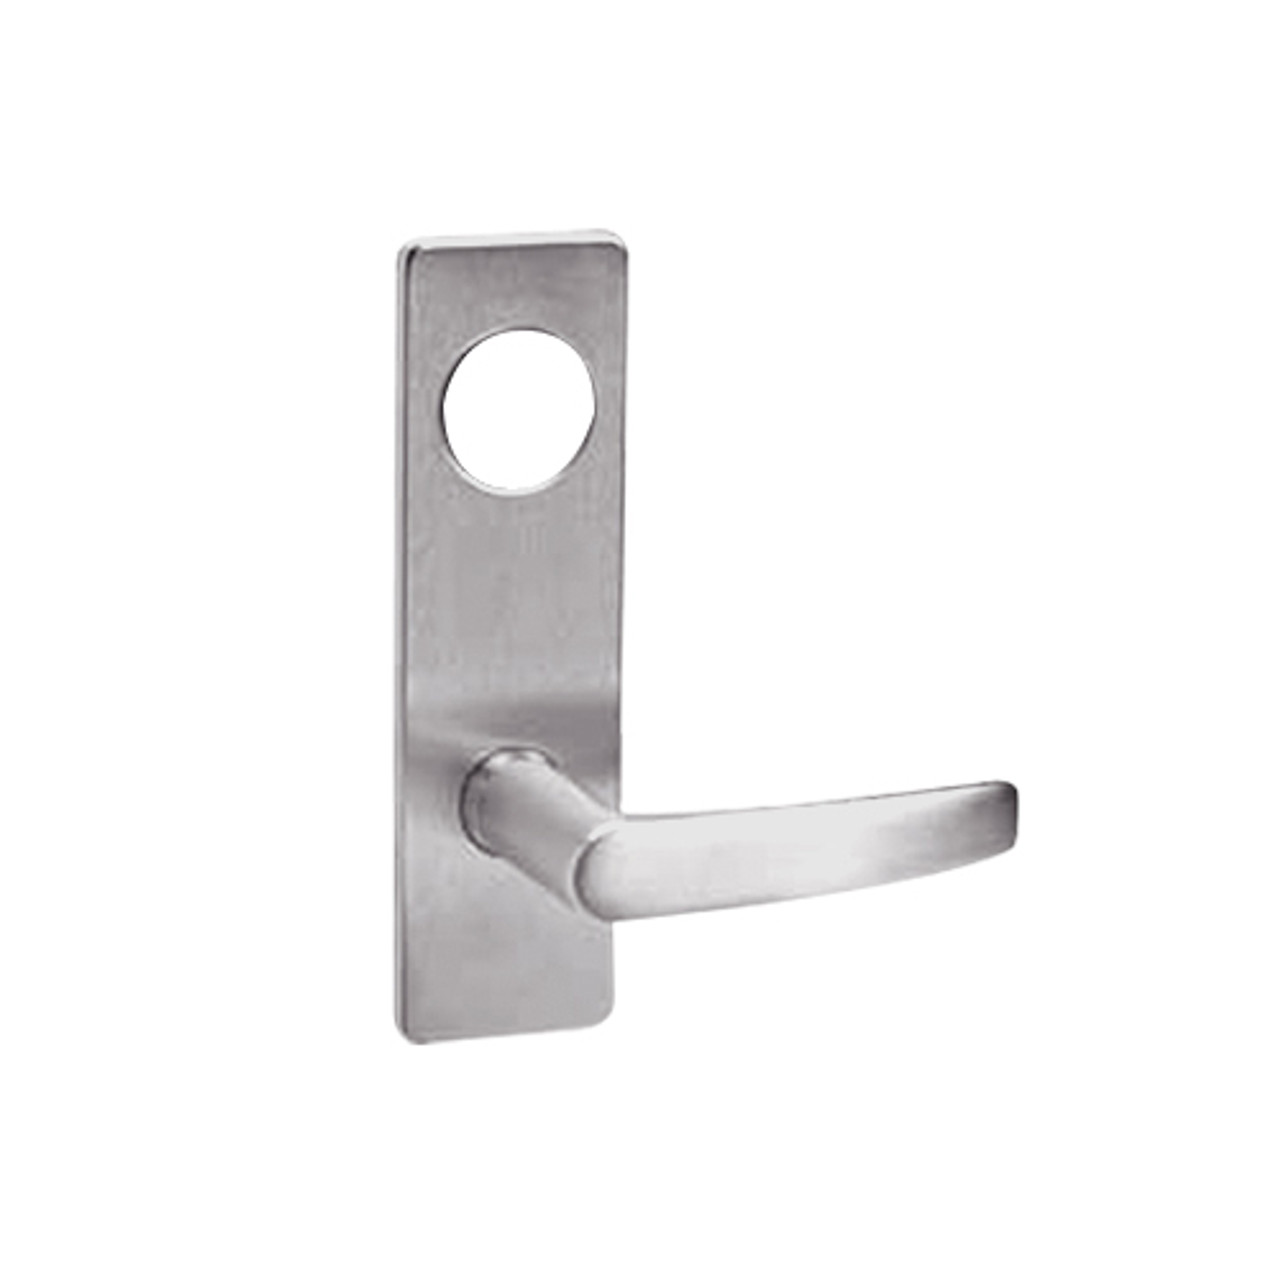 ML2057-ASP-630-CL7 Corbin Russwin ML2000 Series IC 7-Pin Less Core Mortise Storeroom Locksets with Armstrong Lever in Satin Stainless